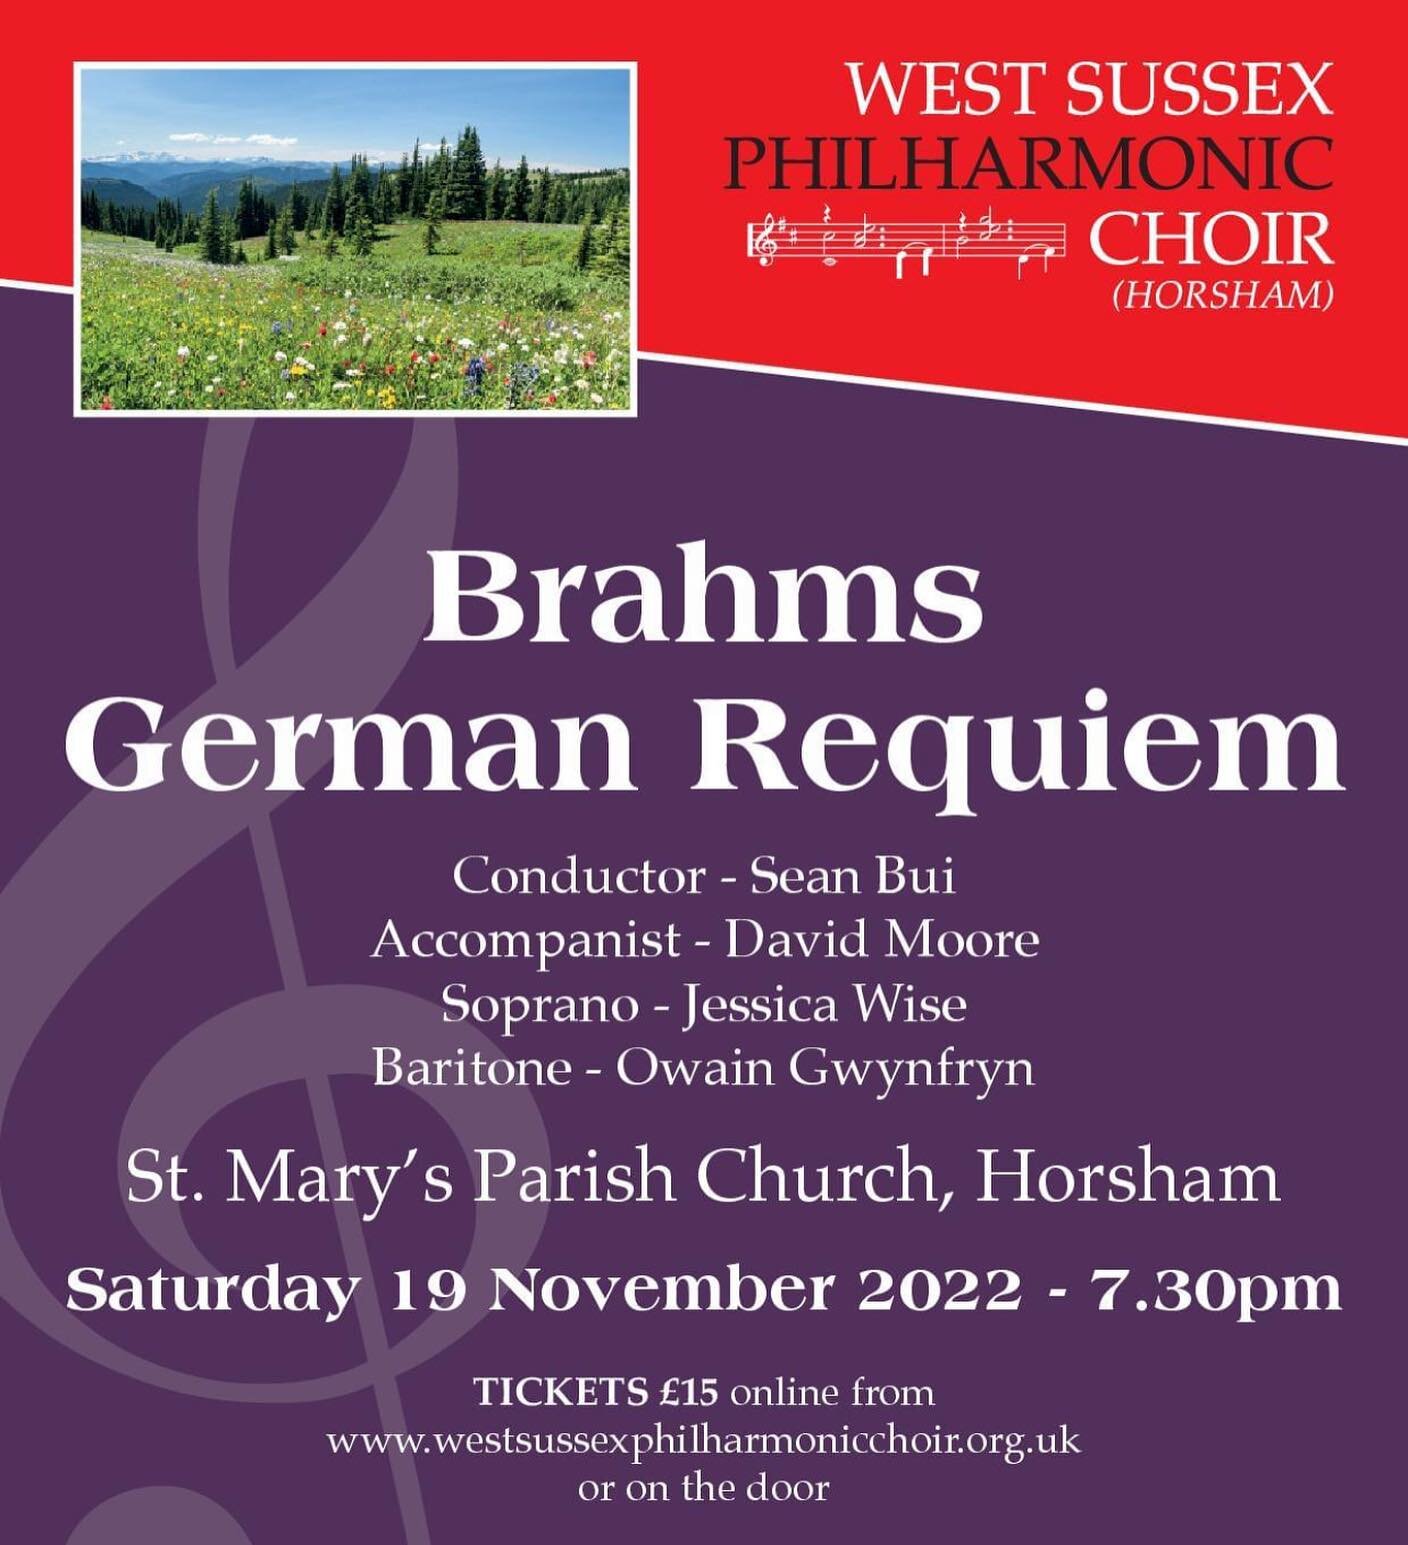 Very excited to be singing the beautiful Baritone Solo parts for this gorgeous piece of music with the wonderful West Sussex Philharmonic Choir in Horsham on November the 19th with my good friend and very talented soprano Jessica Wise

Tickets are on